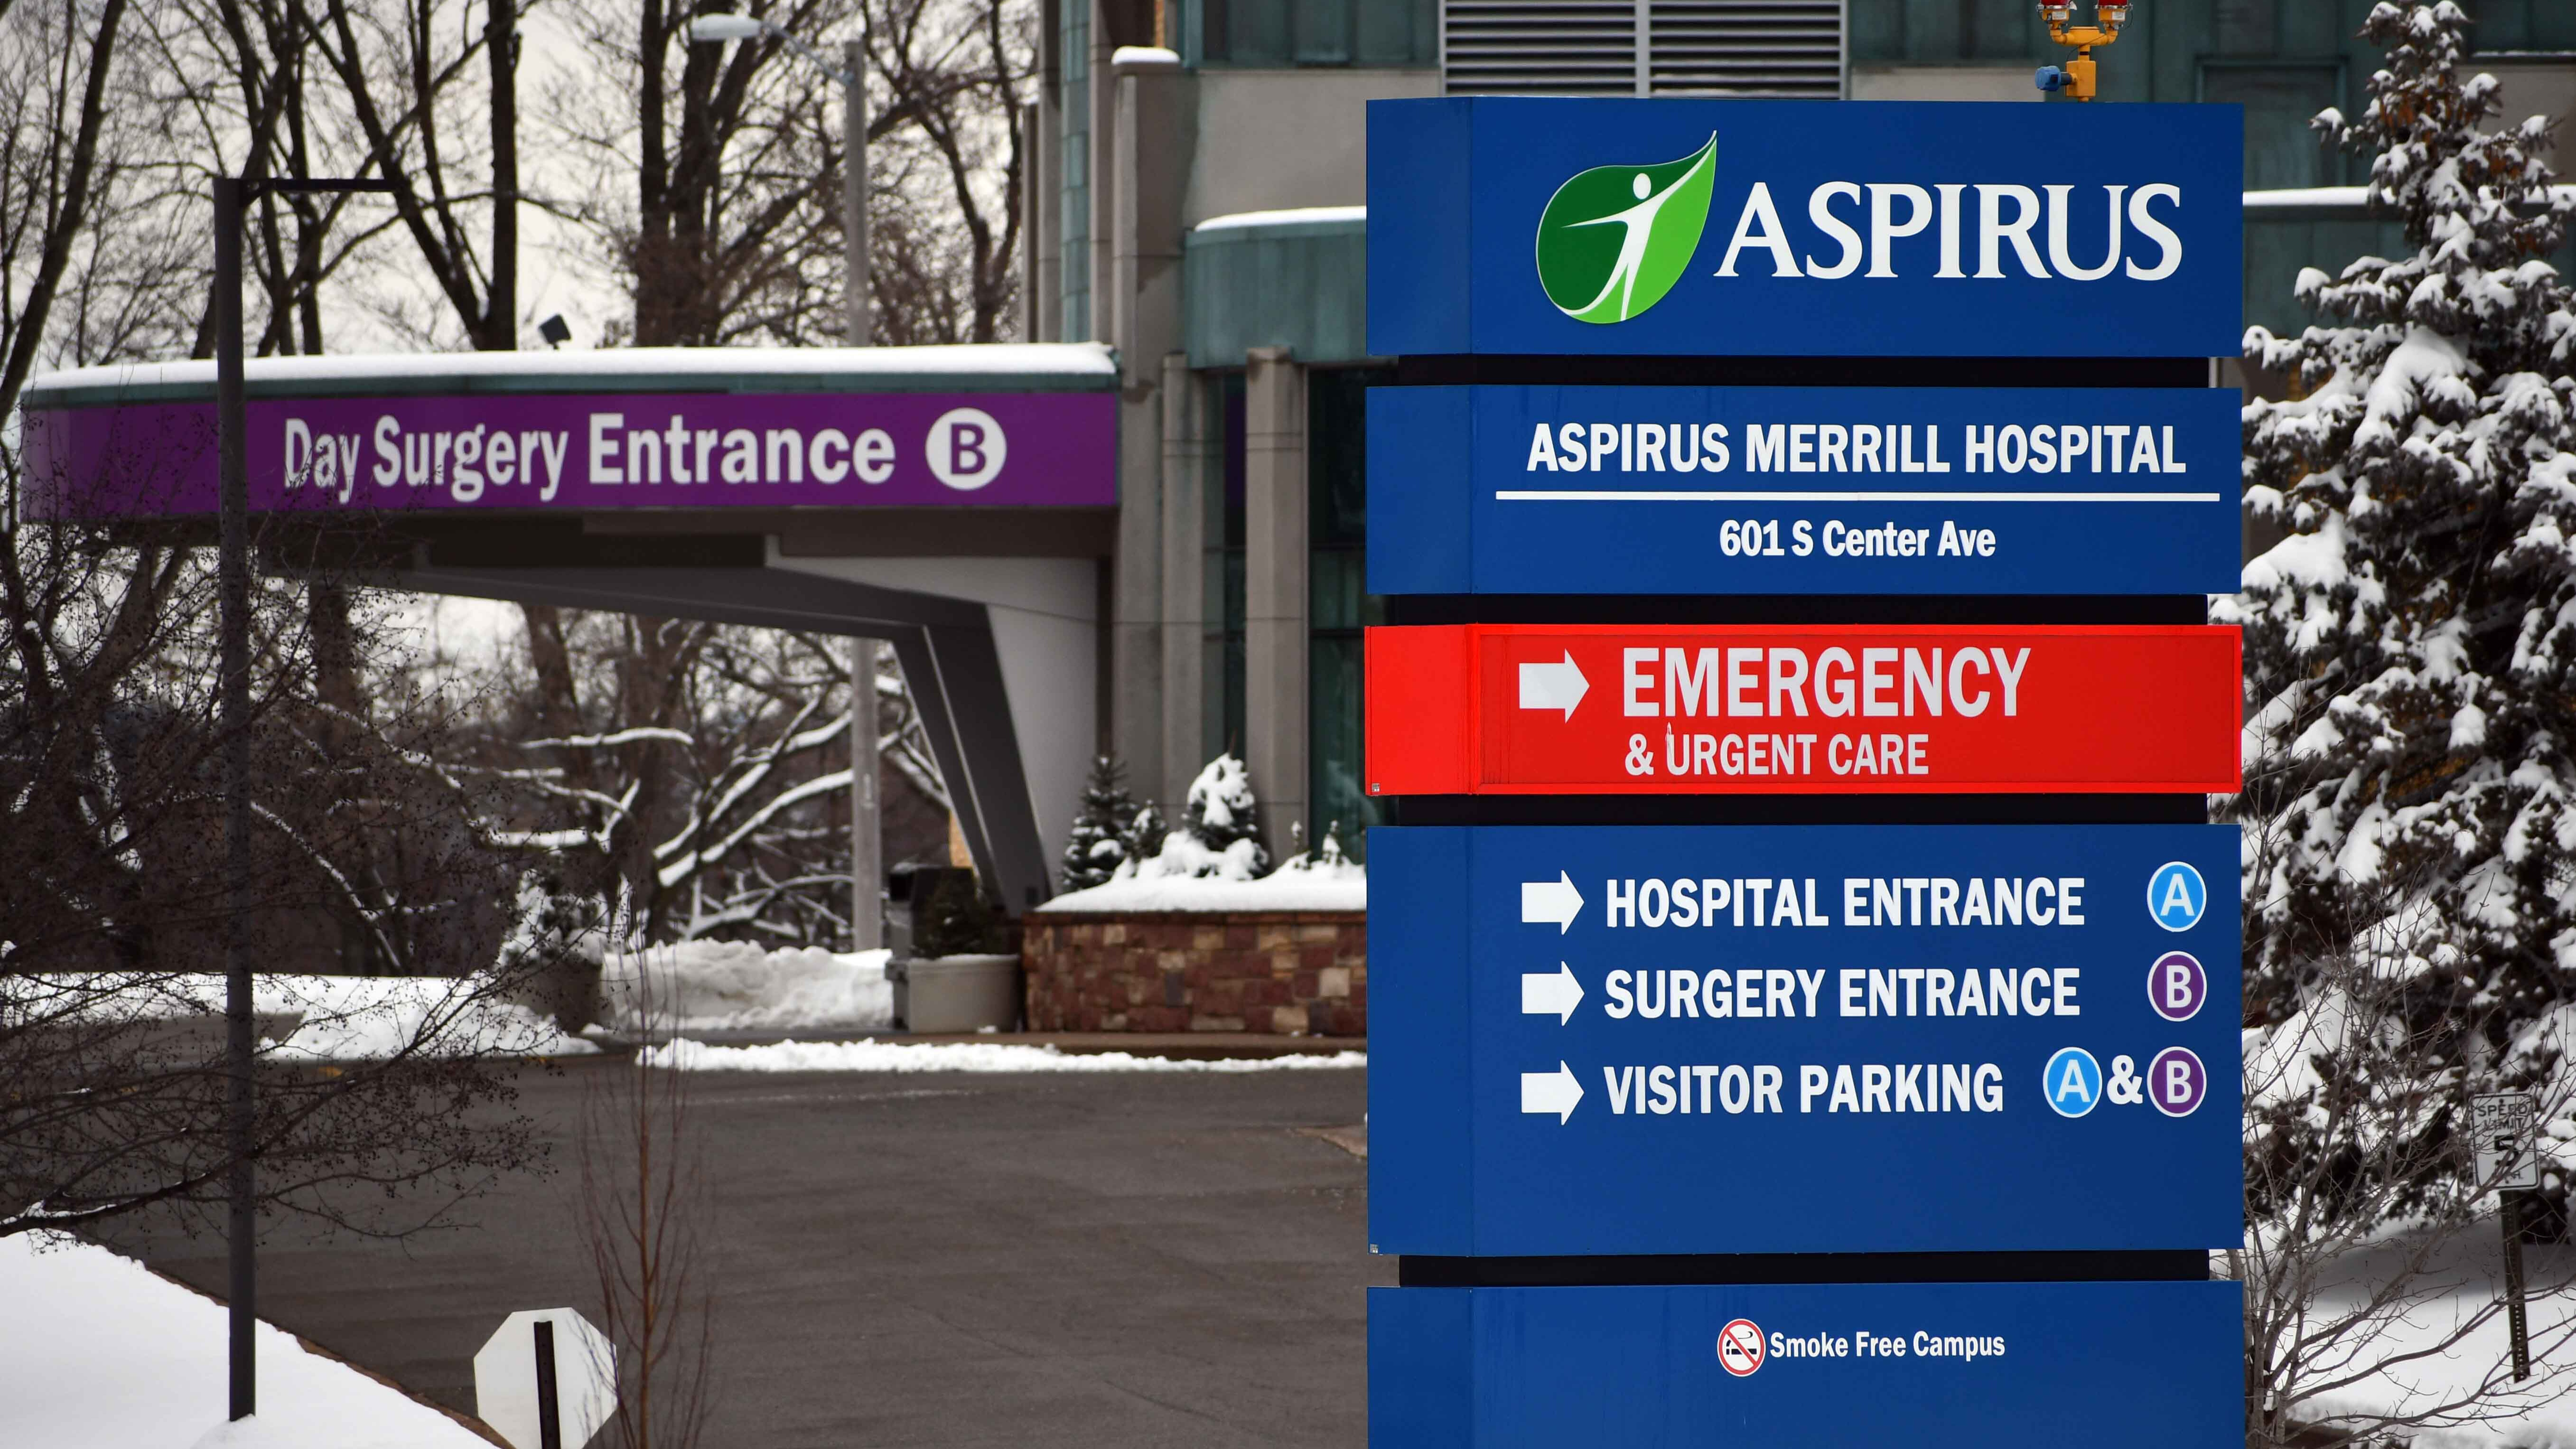 Aspirus Merrill Hospital Embarks on a $40 Million Renovation and Expansion Project